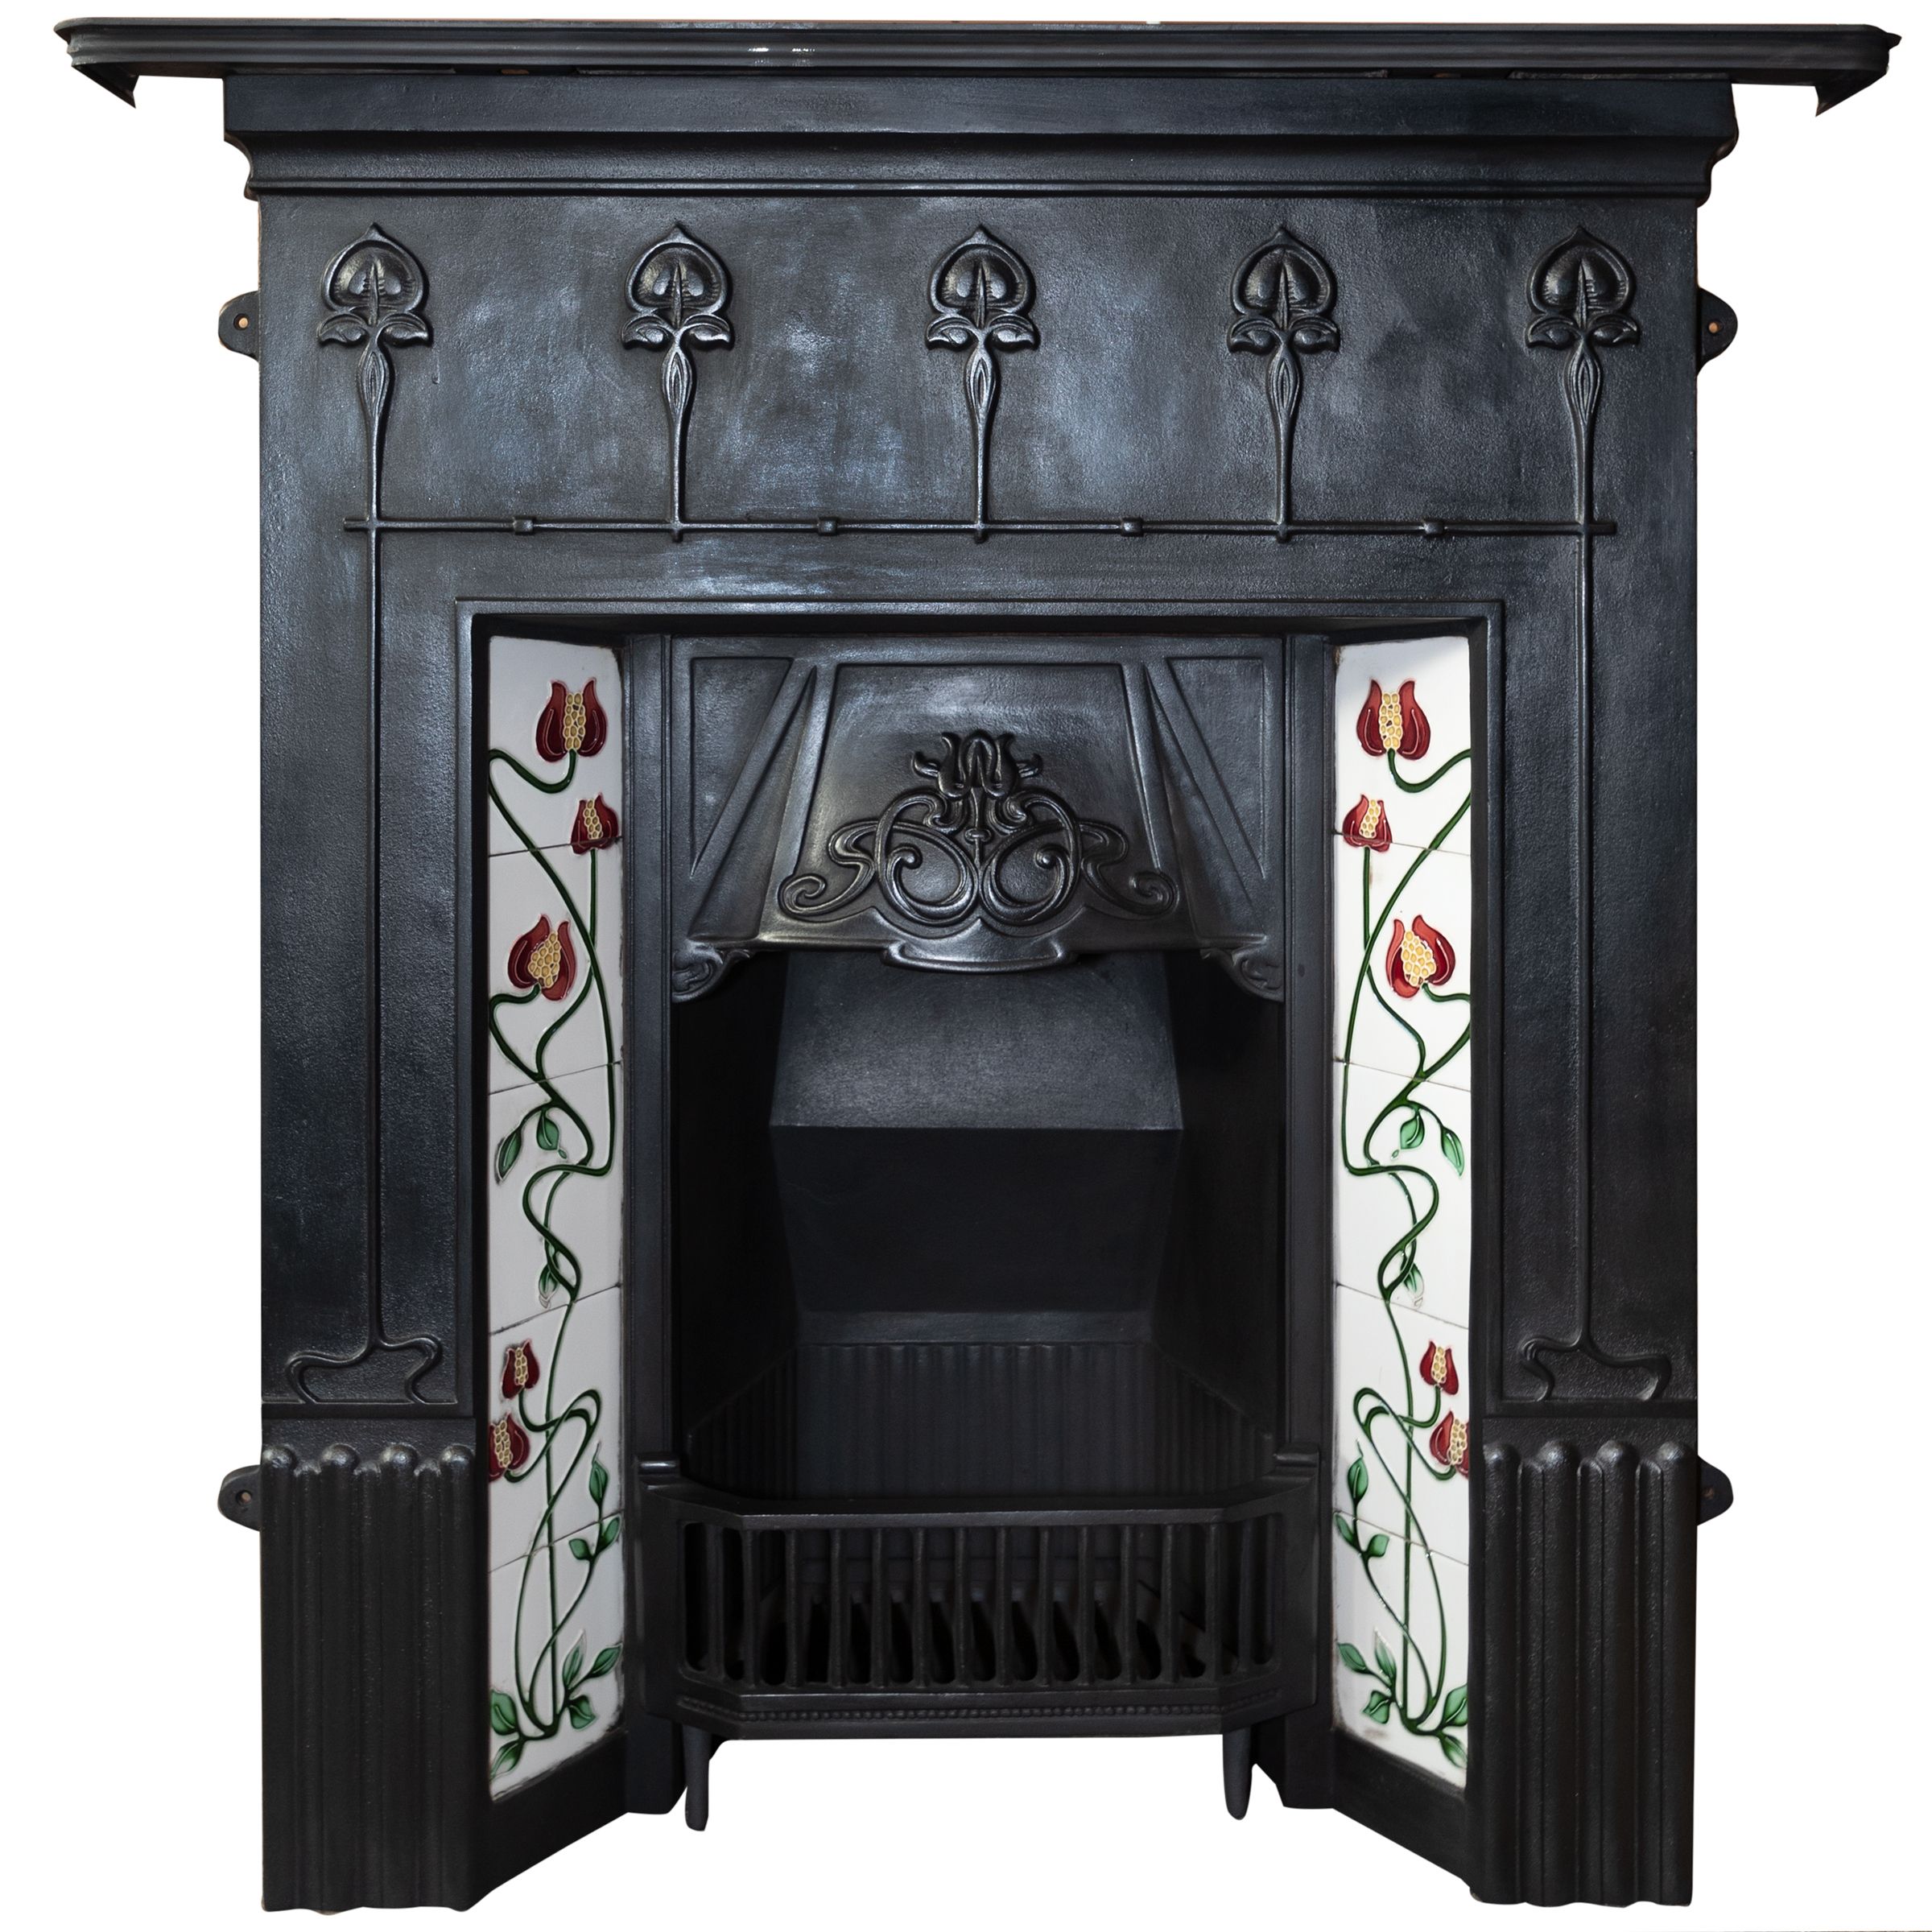 Fireplace Experts Unique Huge Selection Of Antique Cast Iron Fireplaces Fully